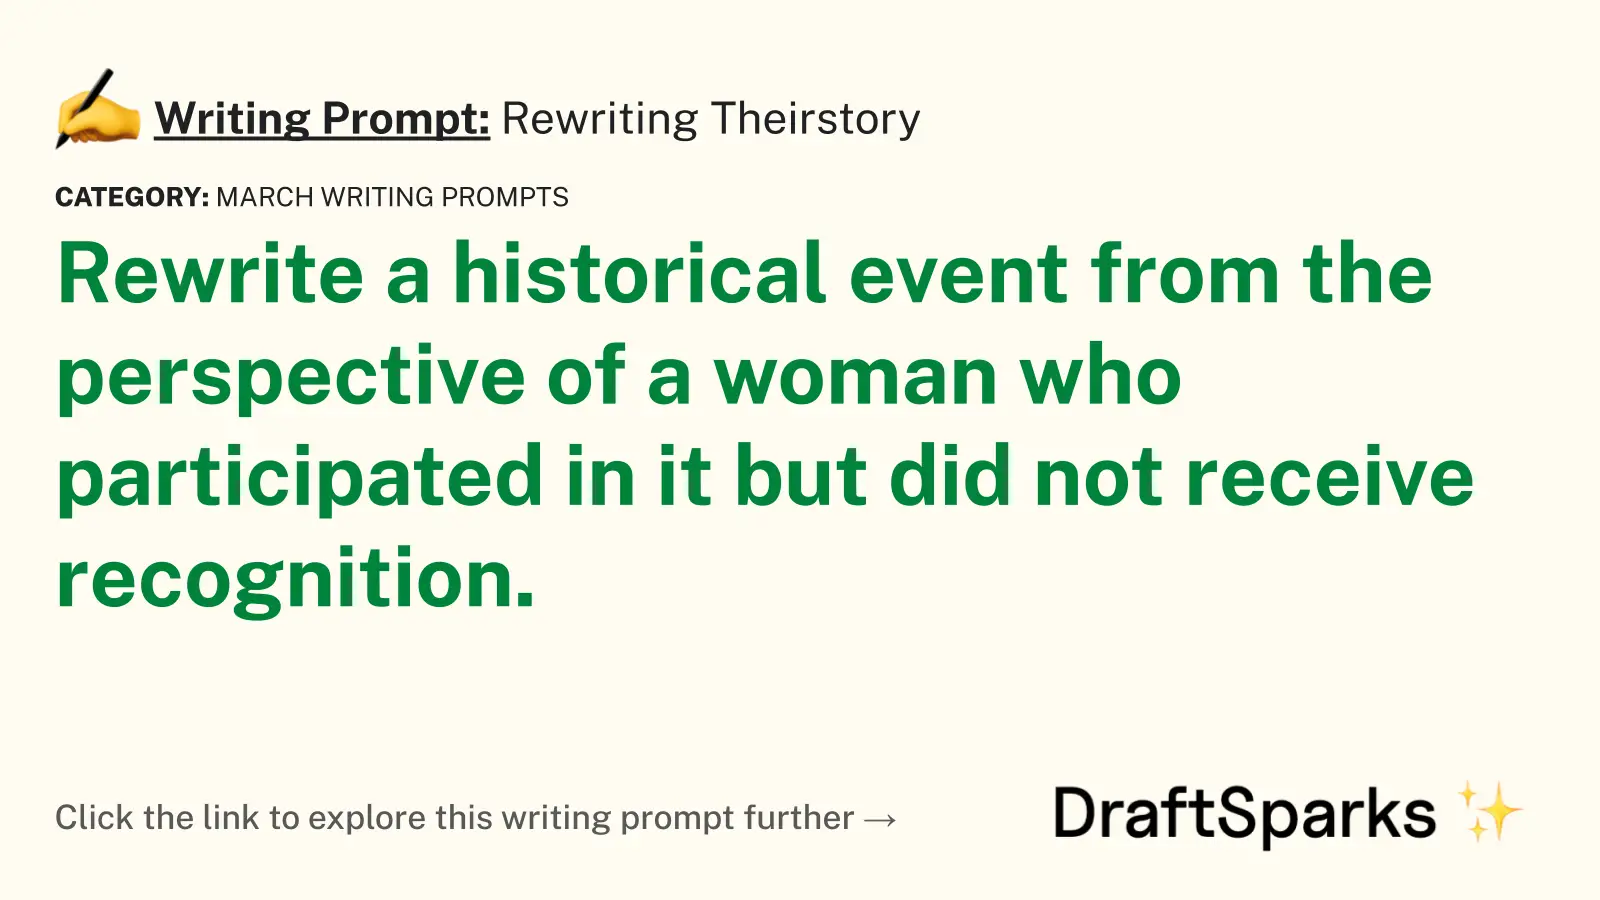 Rewriting Theirstory